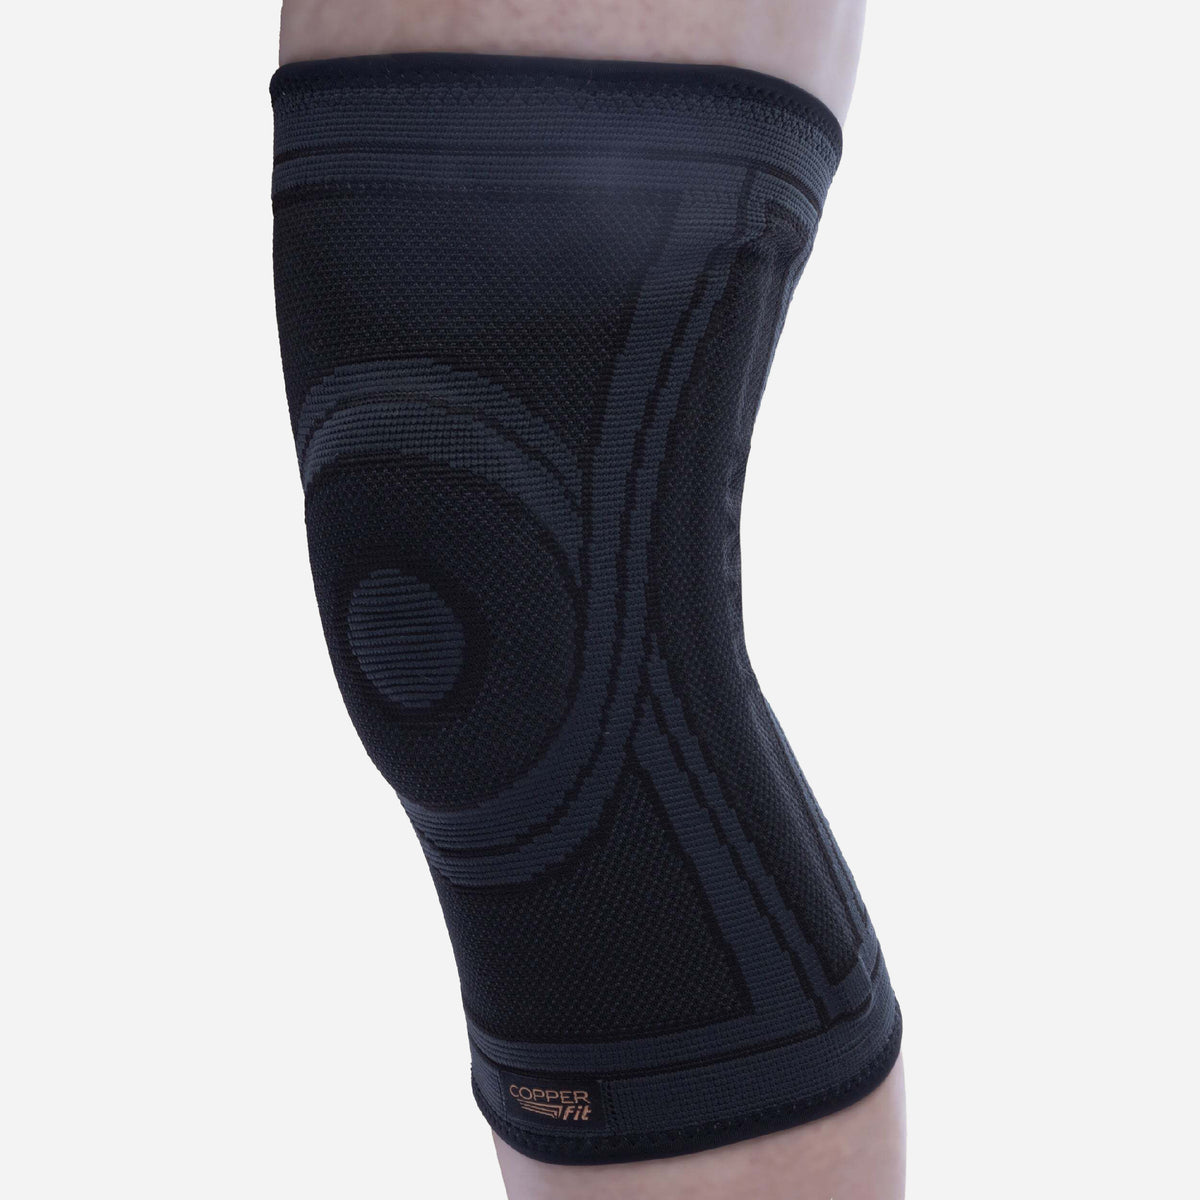 Copper Fit Freedom Knee Sleeve 2 Packs, Copper Infused Compression (Large)